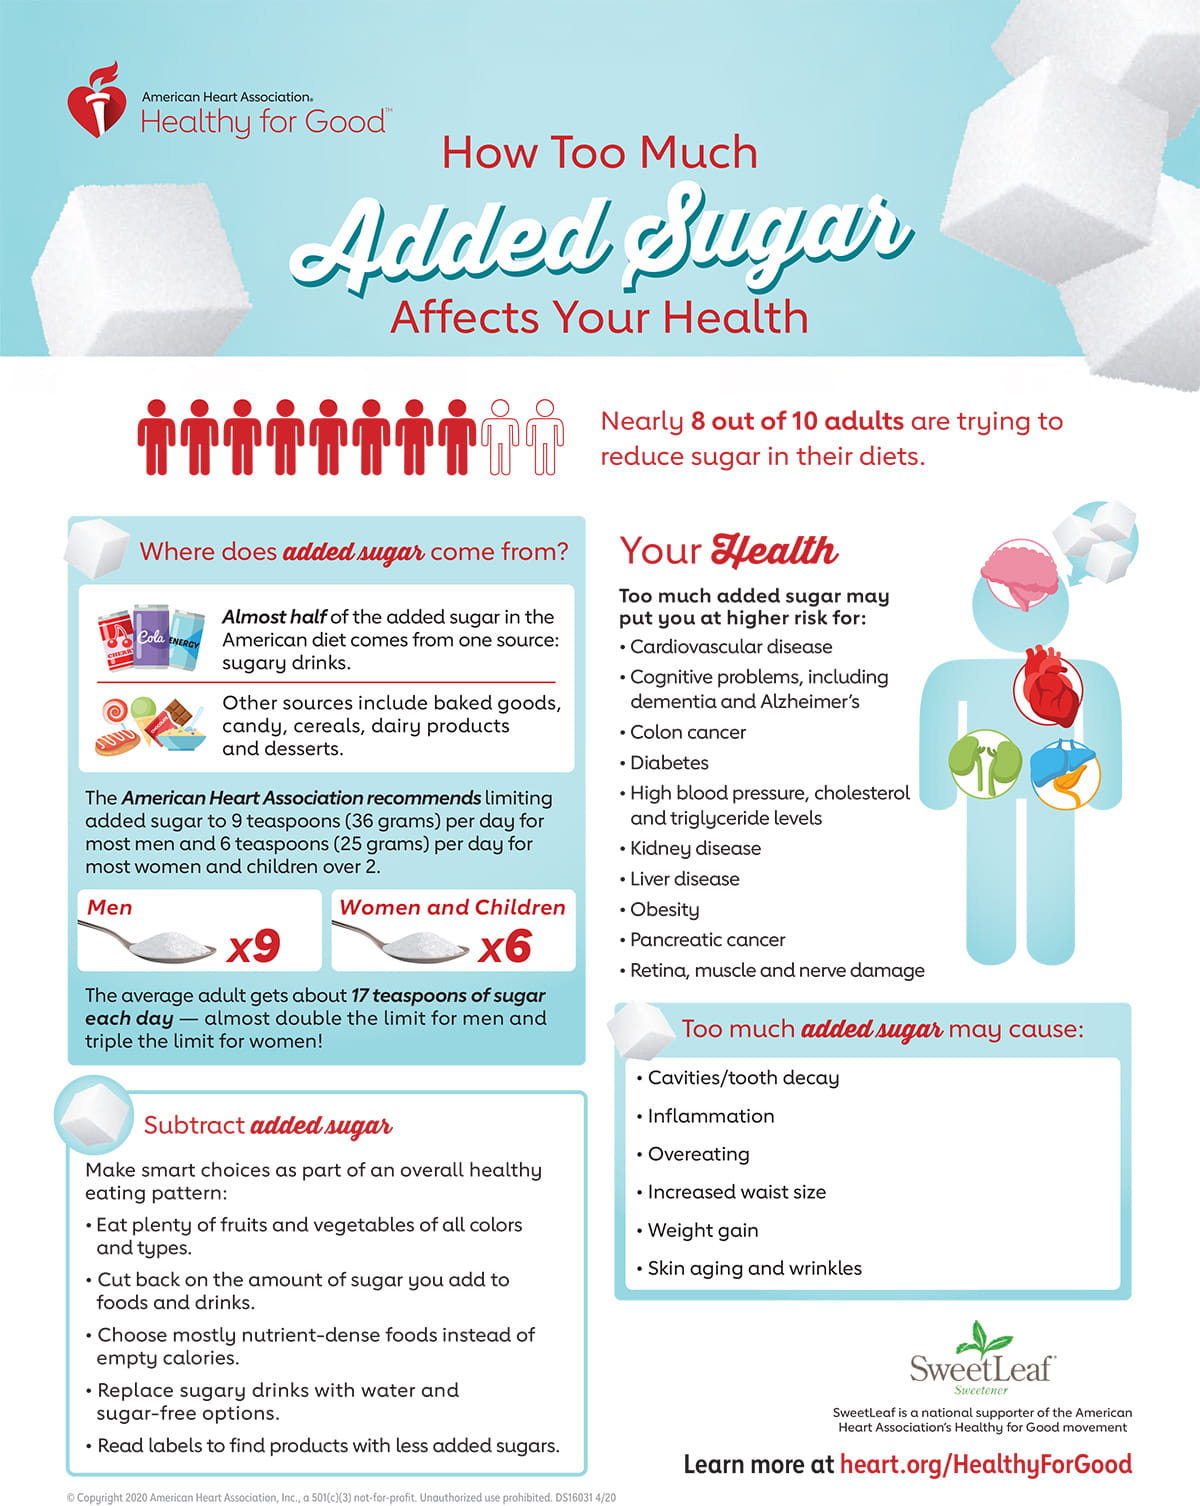 How too much added sugar affects your health